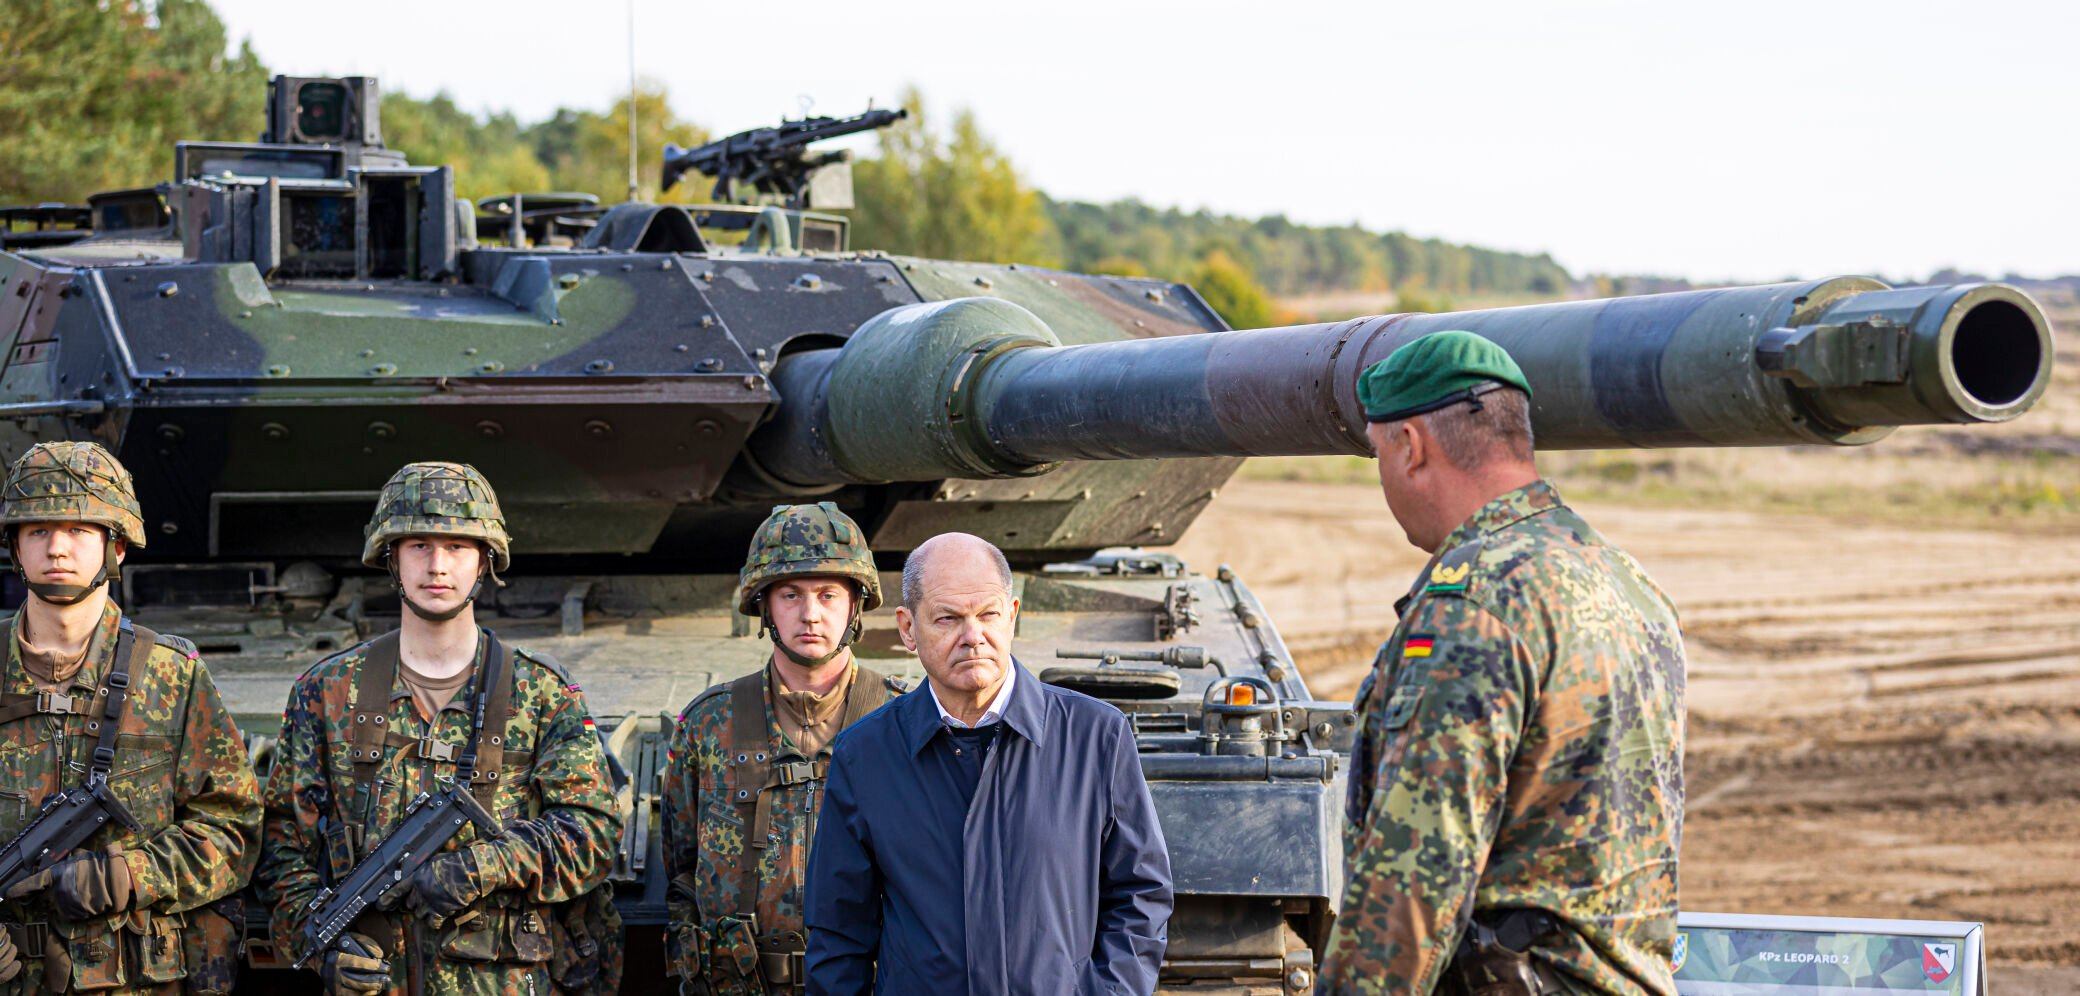 <p>FILE - German Chancellor Olaf Scholz stands with German army Bundeswehr soldiers at a "Leopard 2" main battle tank during a training and instruction exercise in in Ostenholz, Germany, Monday, Oct. 17, 2022. Scholz is expected to announce Wednesday, Jan. 25, 2023 that his government will approve supplying German-made battle tanks to Ukraine. (Moritz Frankenberg/dpa via AP, File)</p>   PHOTO CREDIT: Moritz Frankenberg - foreign subscriber, DPA